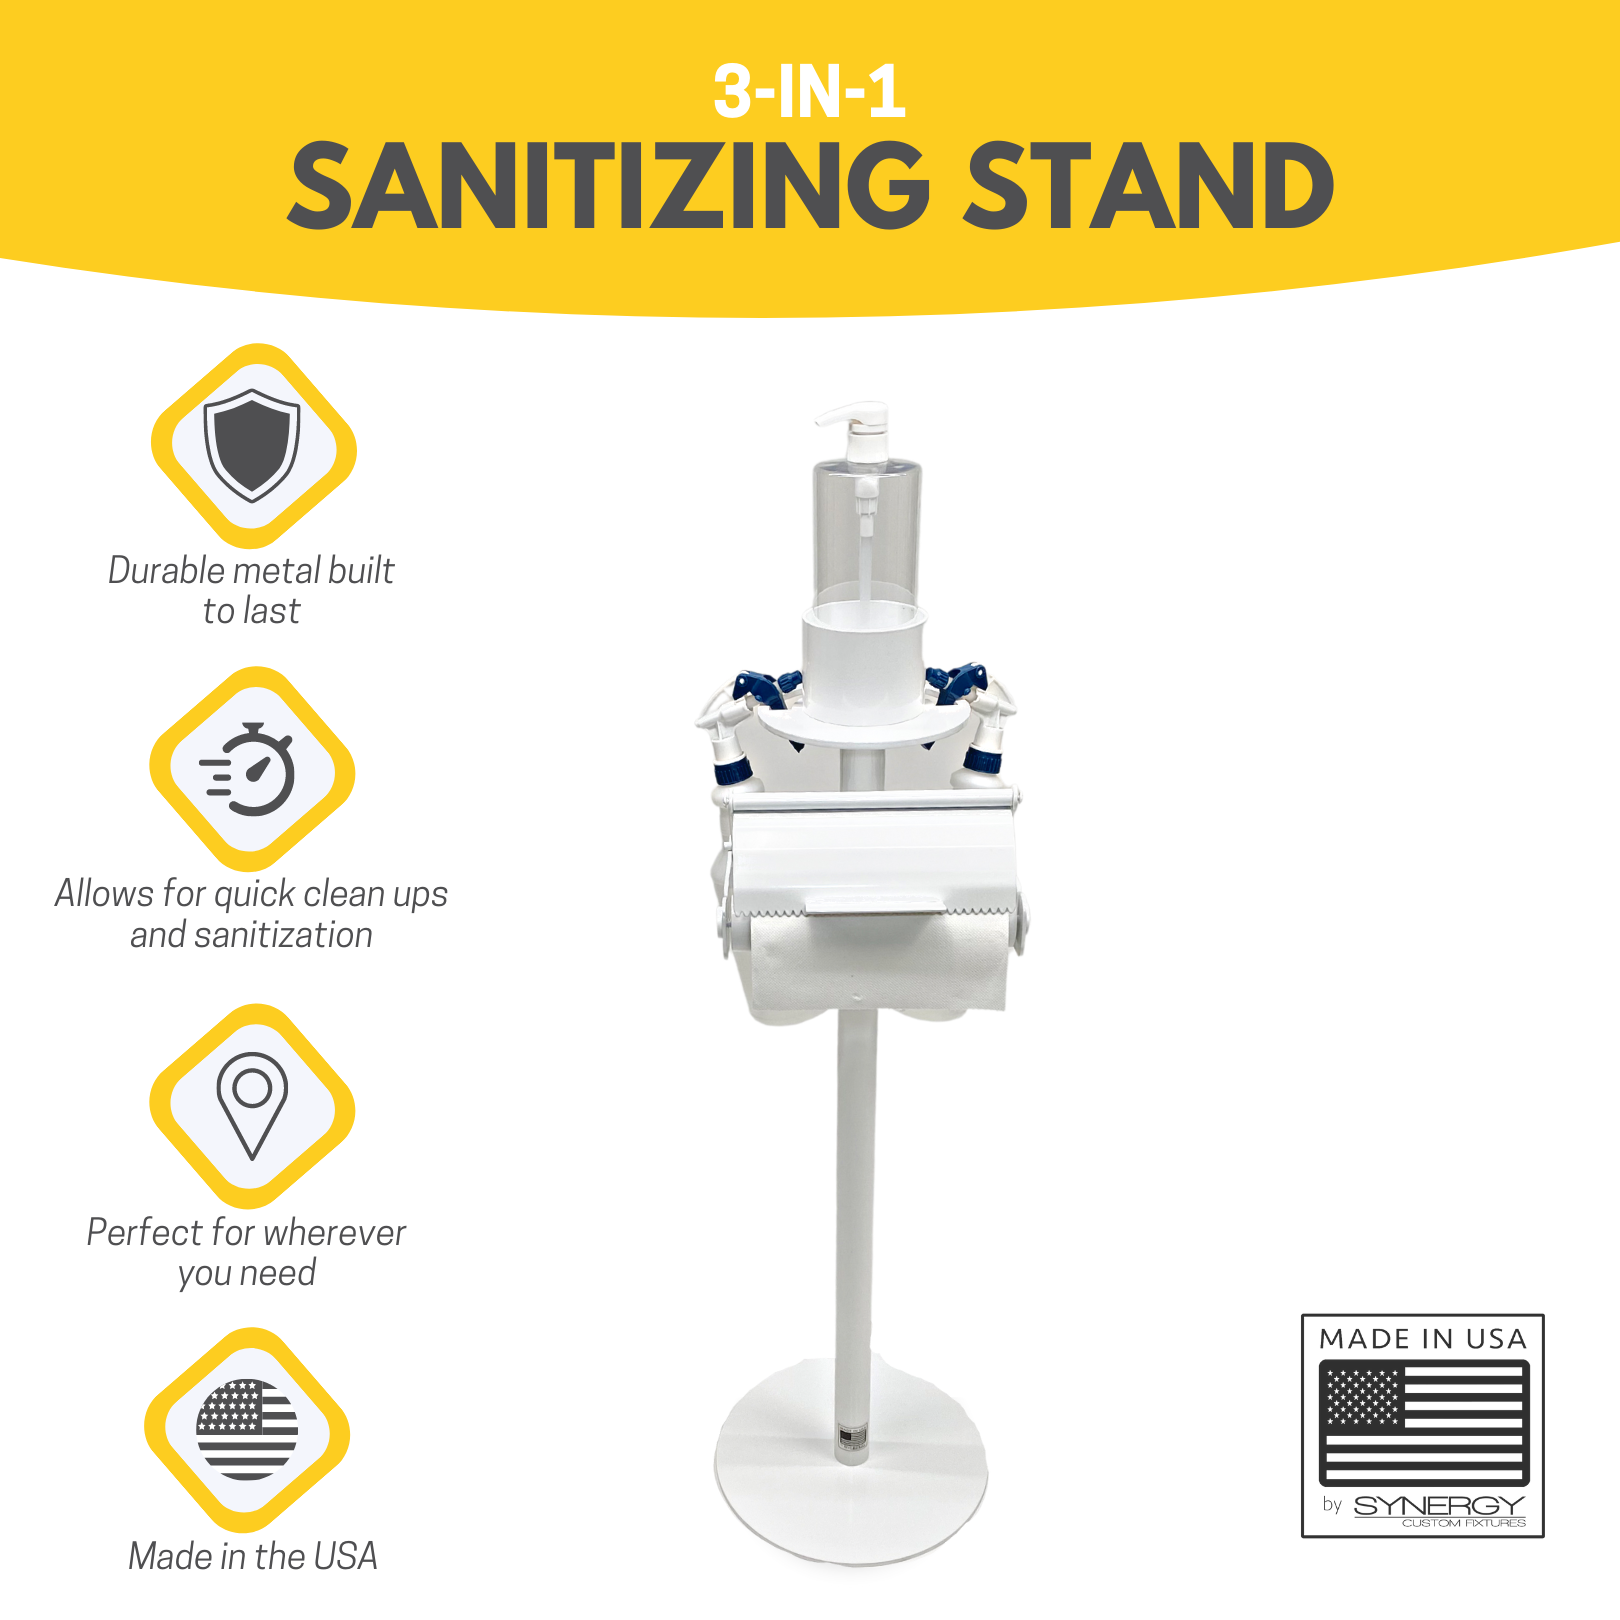 https://synergycustomfixtures.com/wp-content/uploads/2020/07/Sanitizing-Stand-1.png